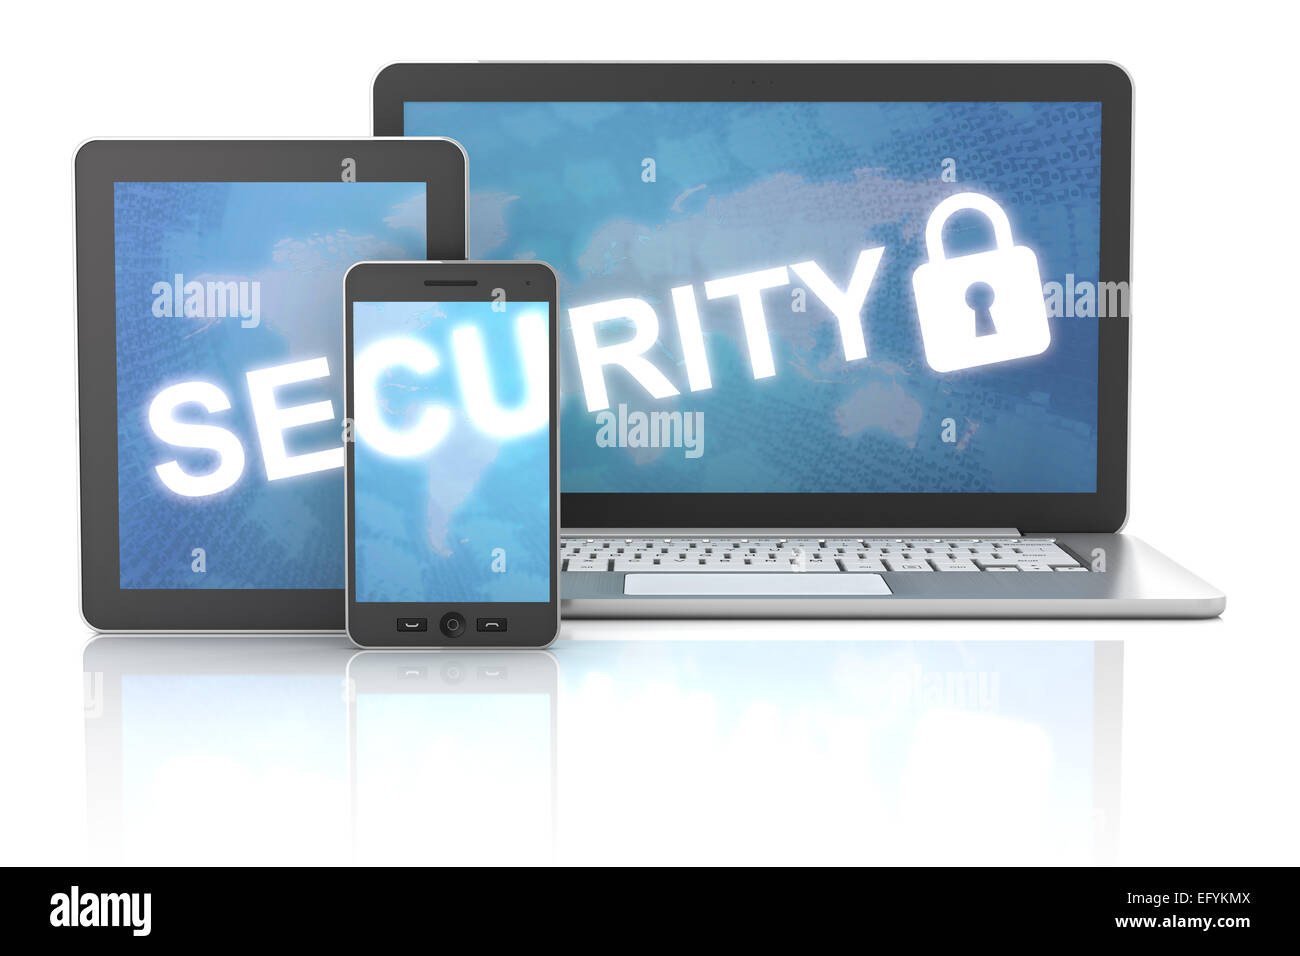 Security of using gadgets, including digital tablet, smartphone Stock Photo